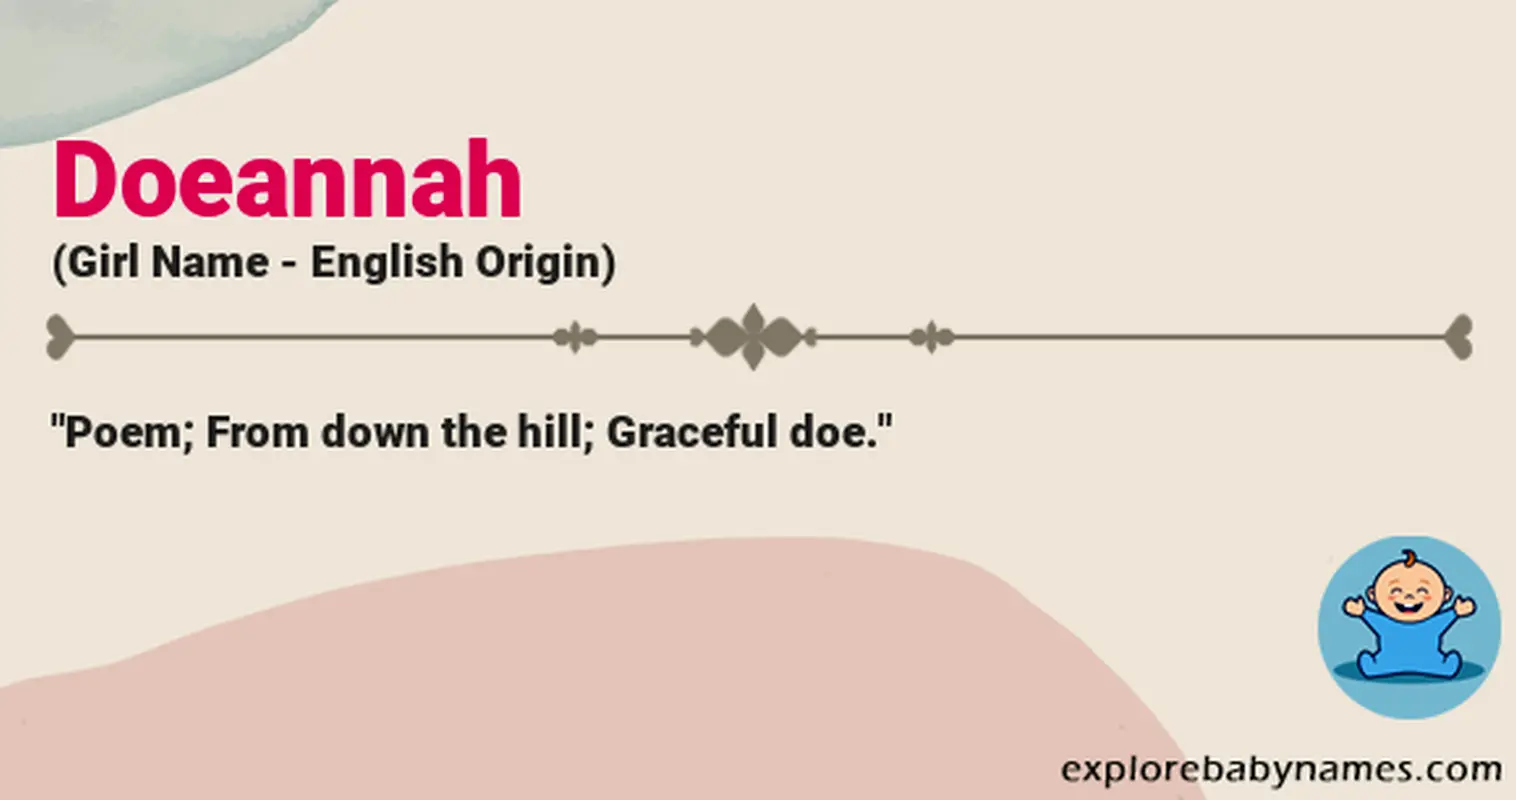 Meaning of Doeannah